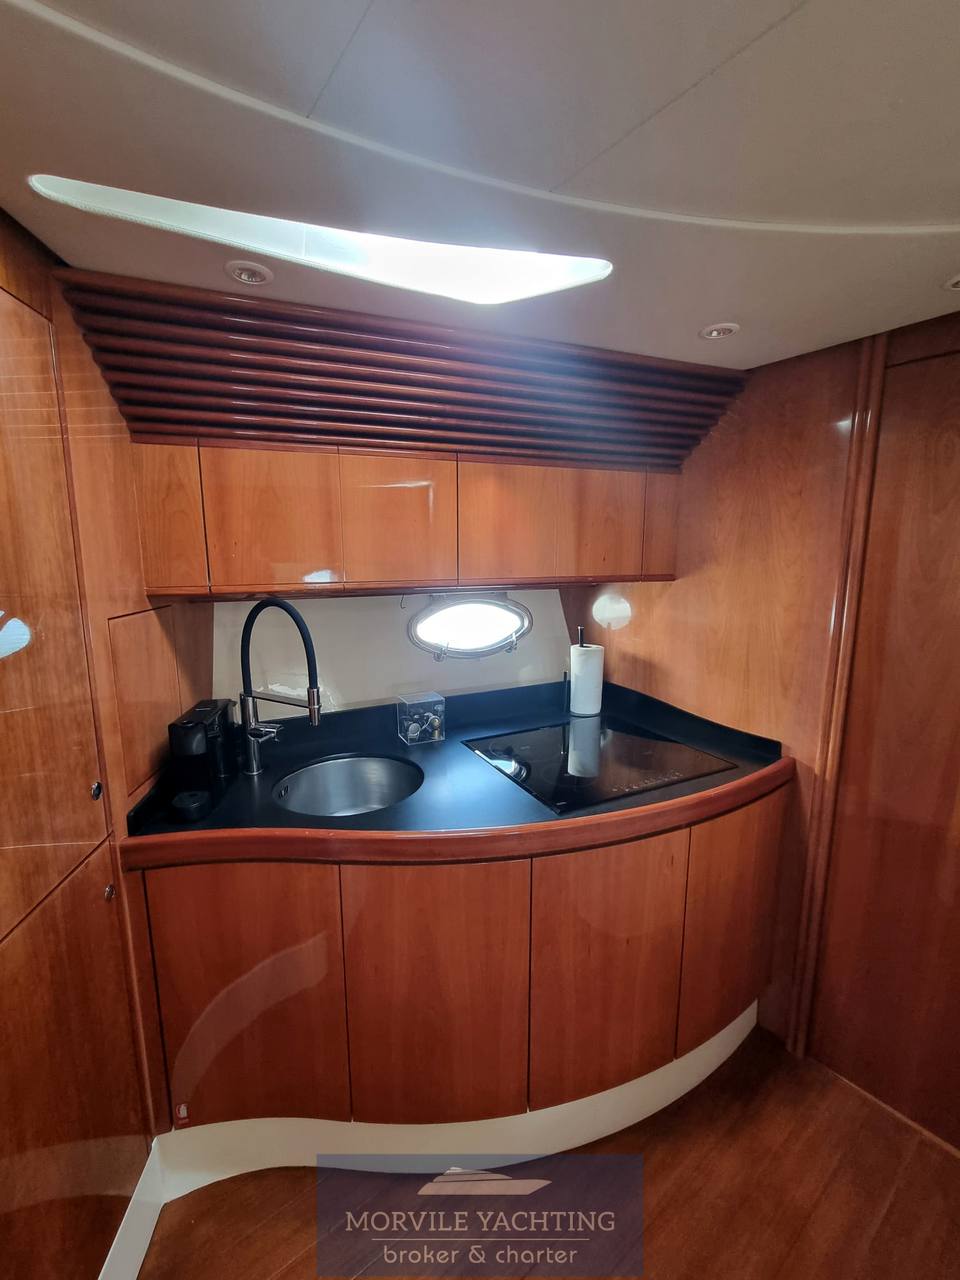 PERSHING 52 Motor boat used for sale